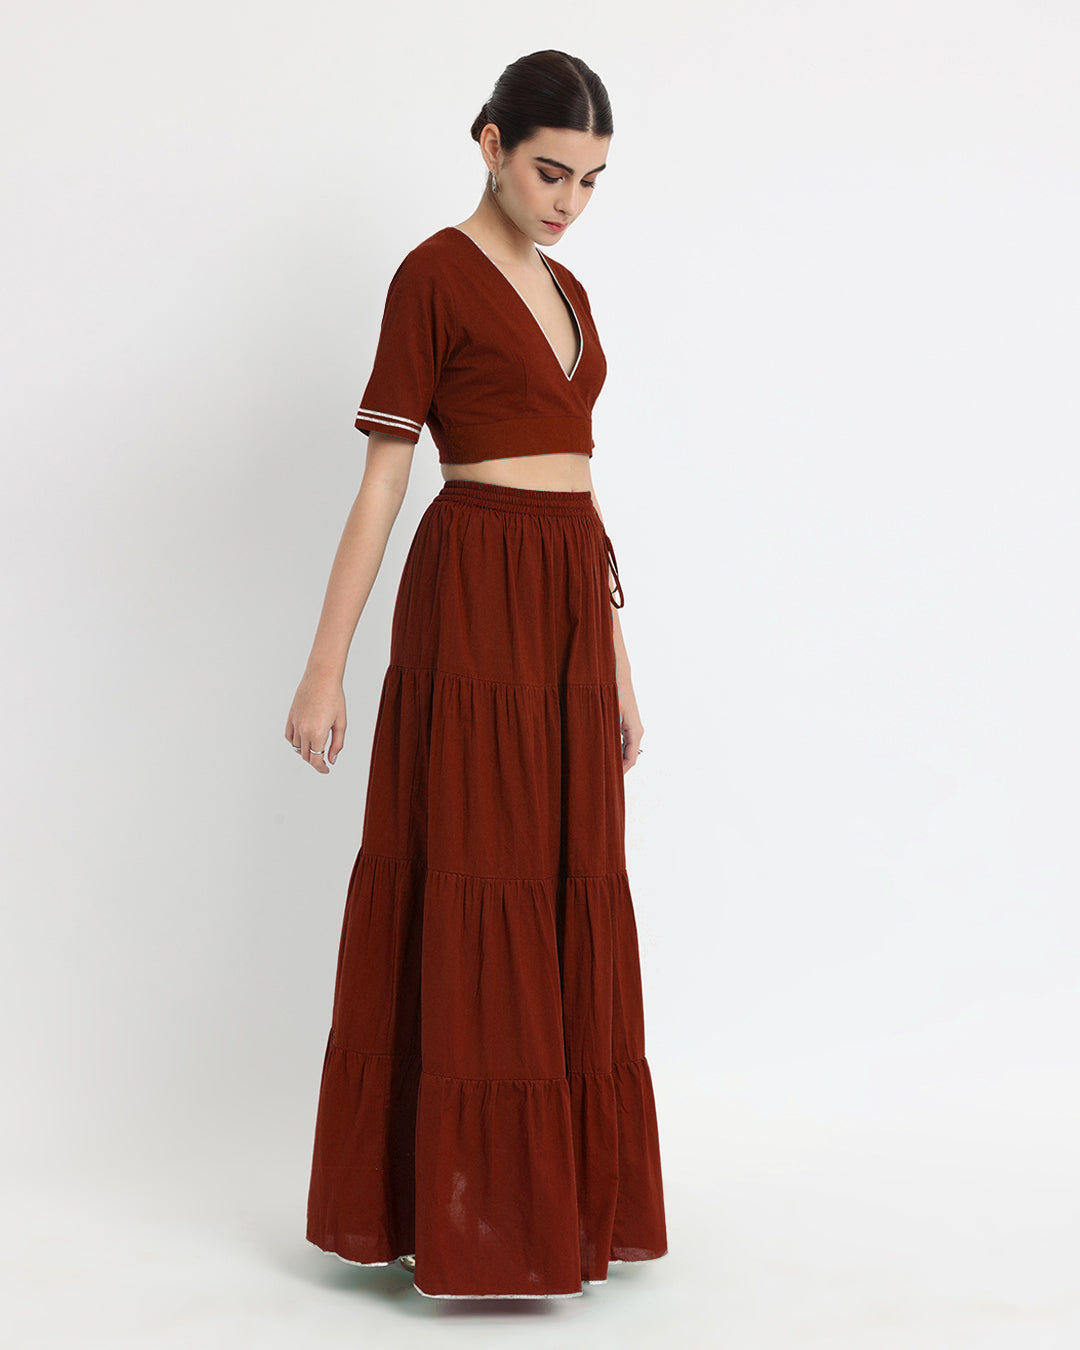 Russet Red Tiery Lace Royal Deep V Co-ord Set